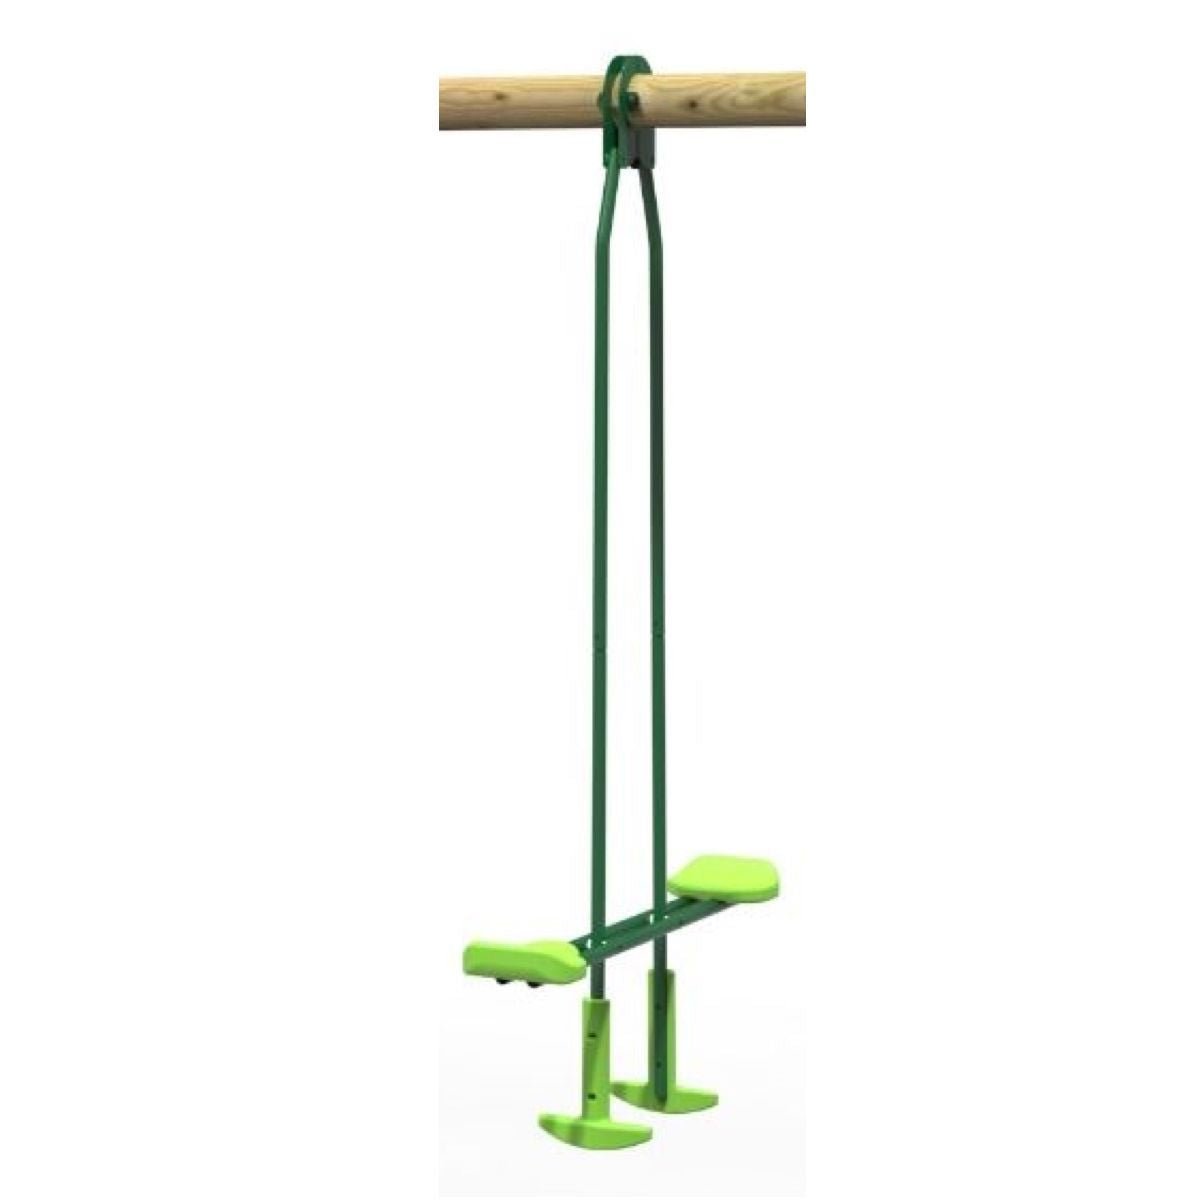 Rebo 2 Person Glider to fit Rebo Round Wood Swing Frames Only - Green